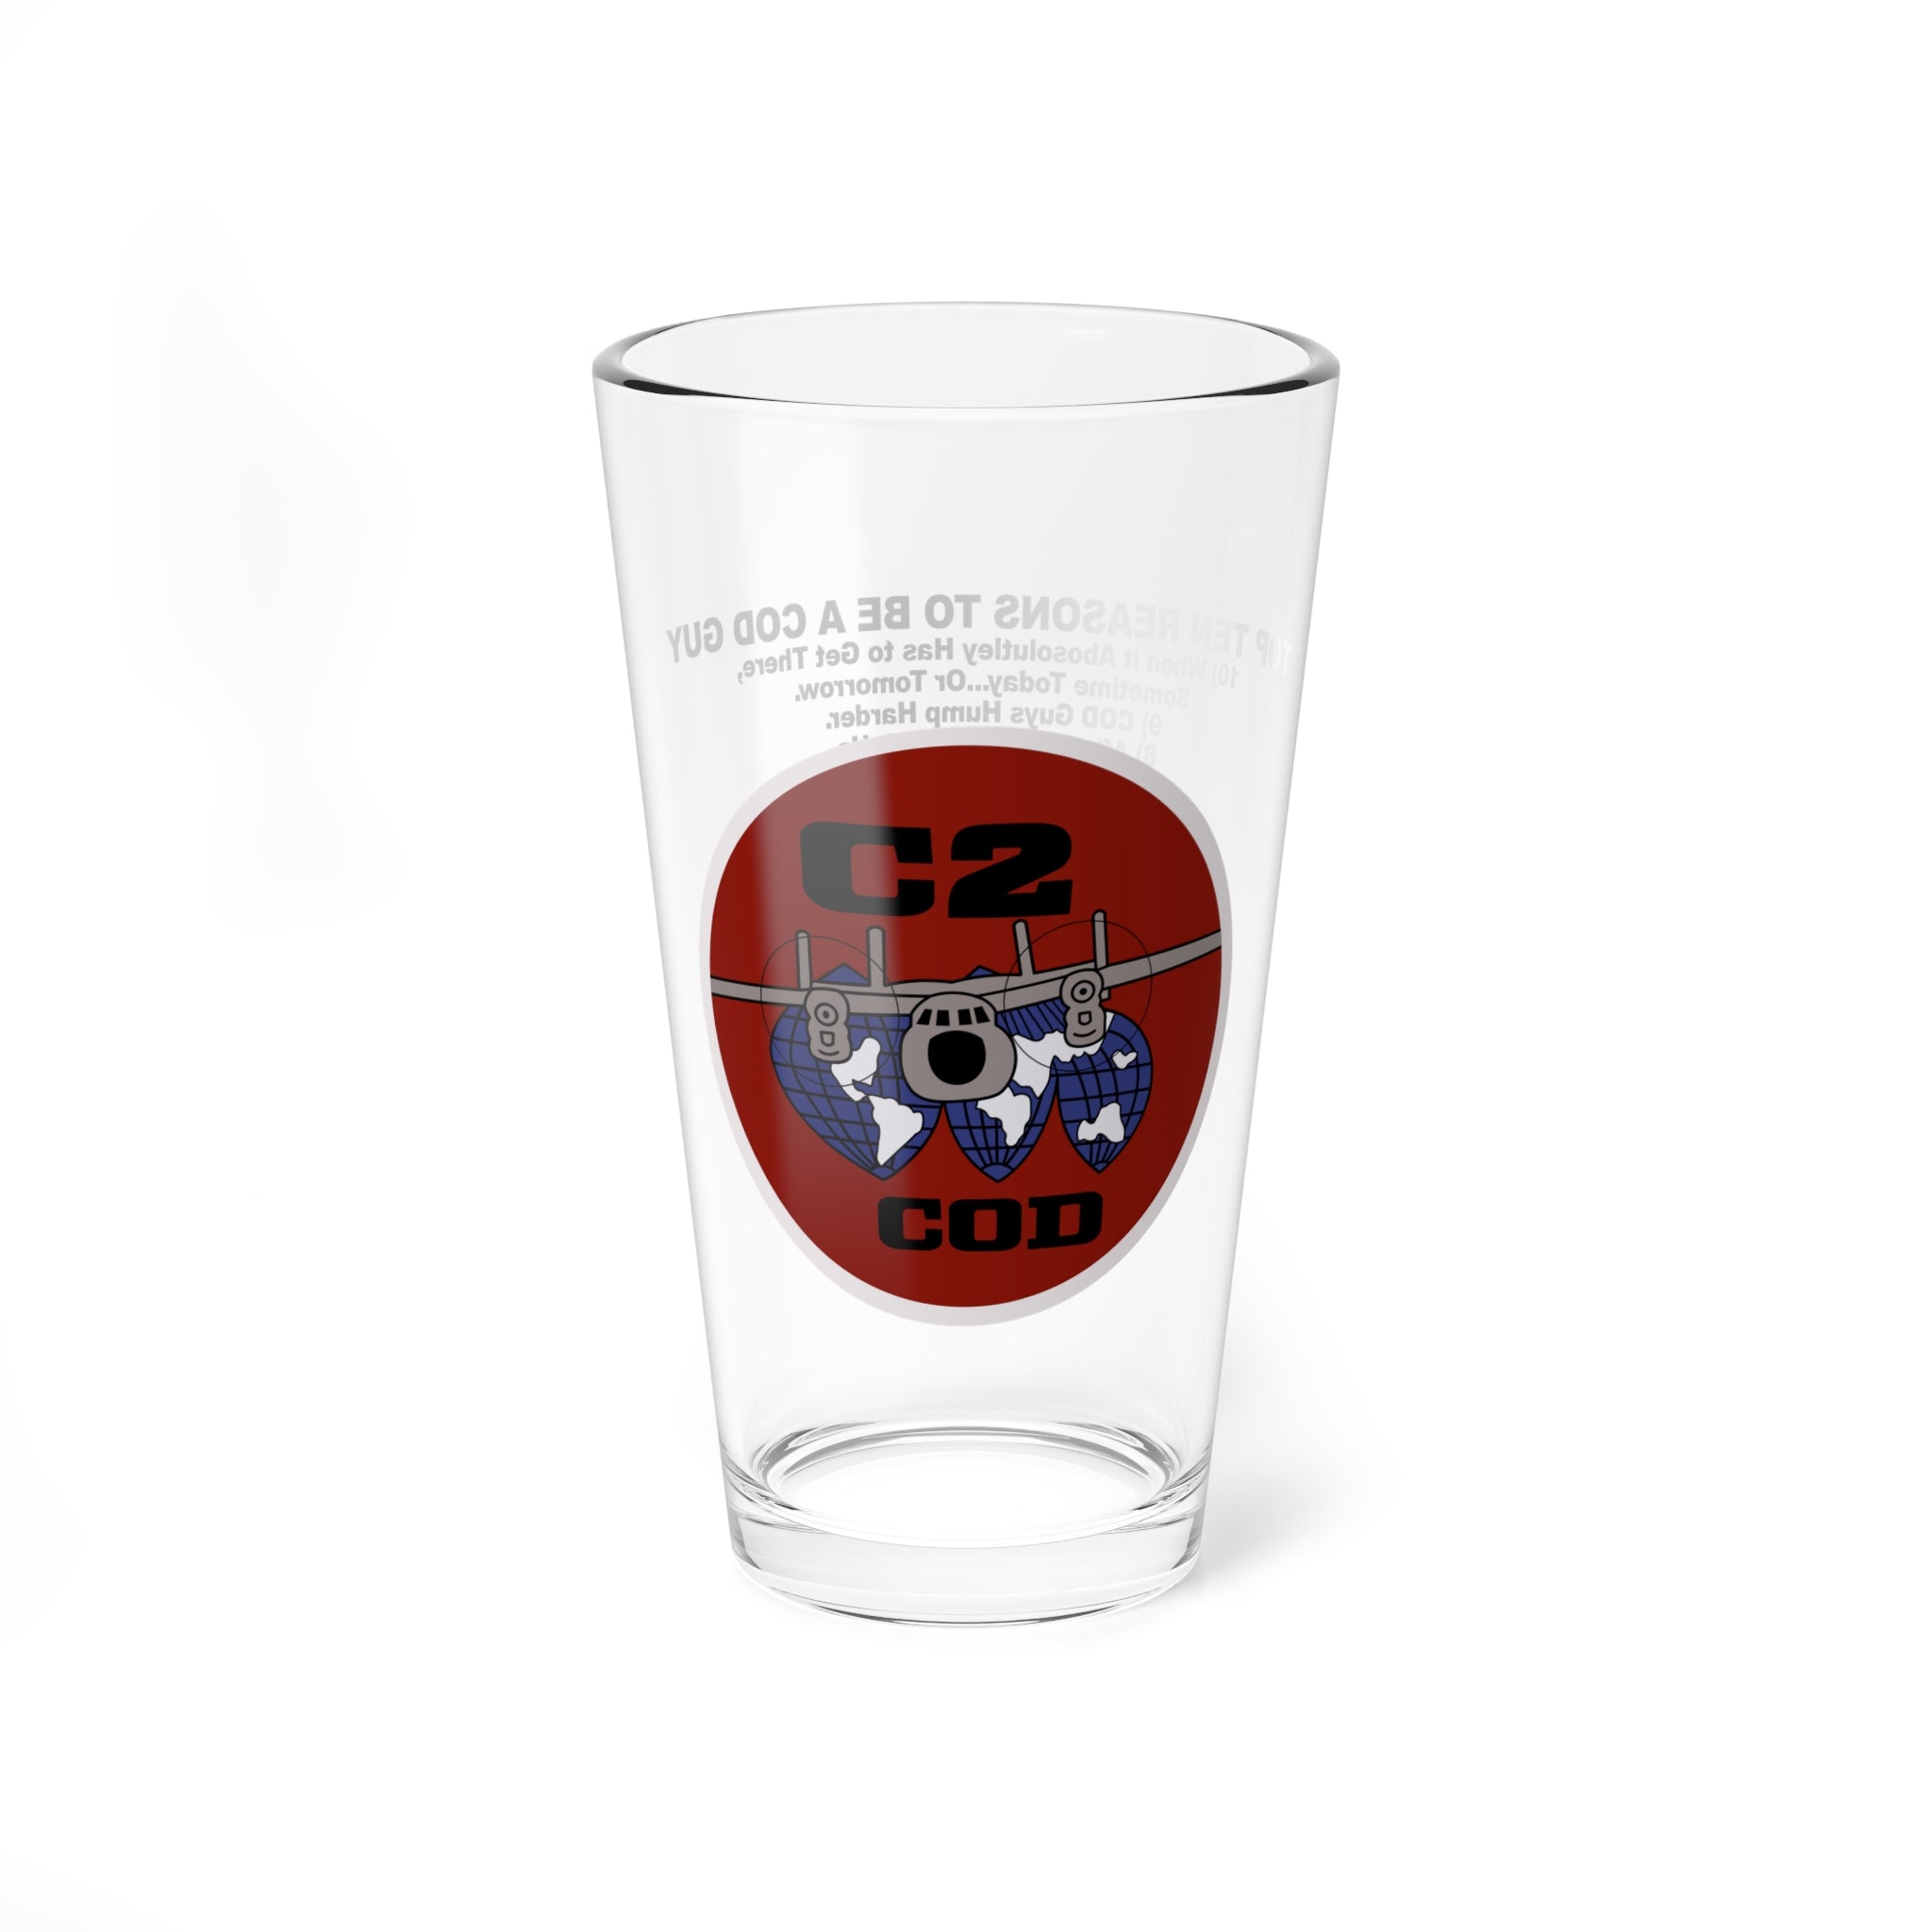 C-2 "Greyhound" Top Ten Reasons Pint Glass, Navy Carrier Onboard Delivery Aircraft with Reasons to be a COD Guy